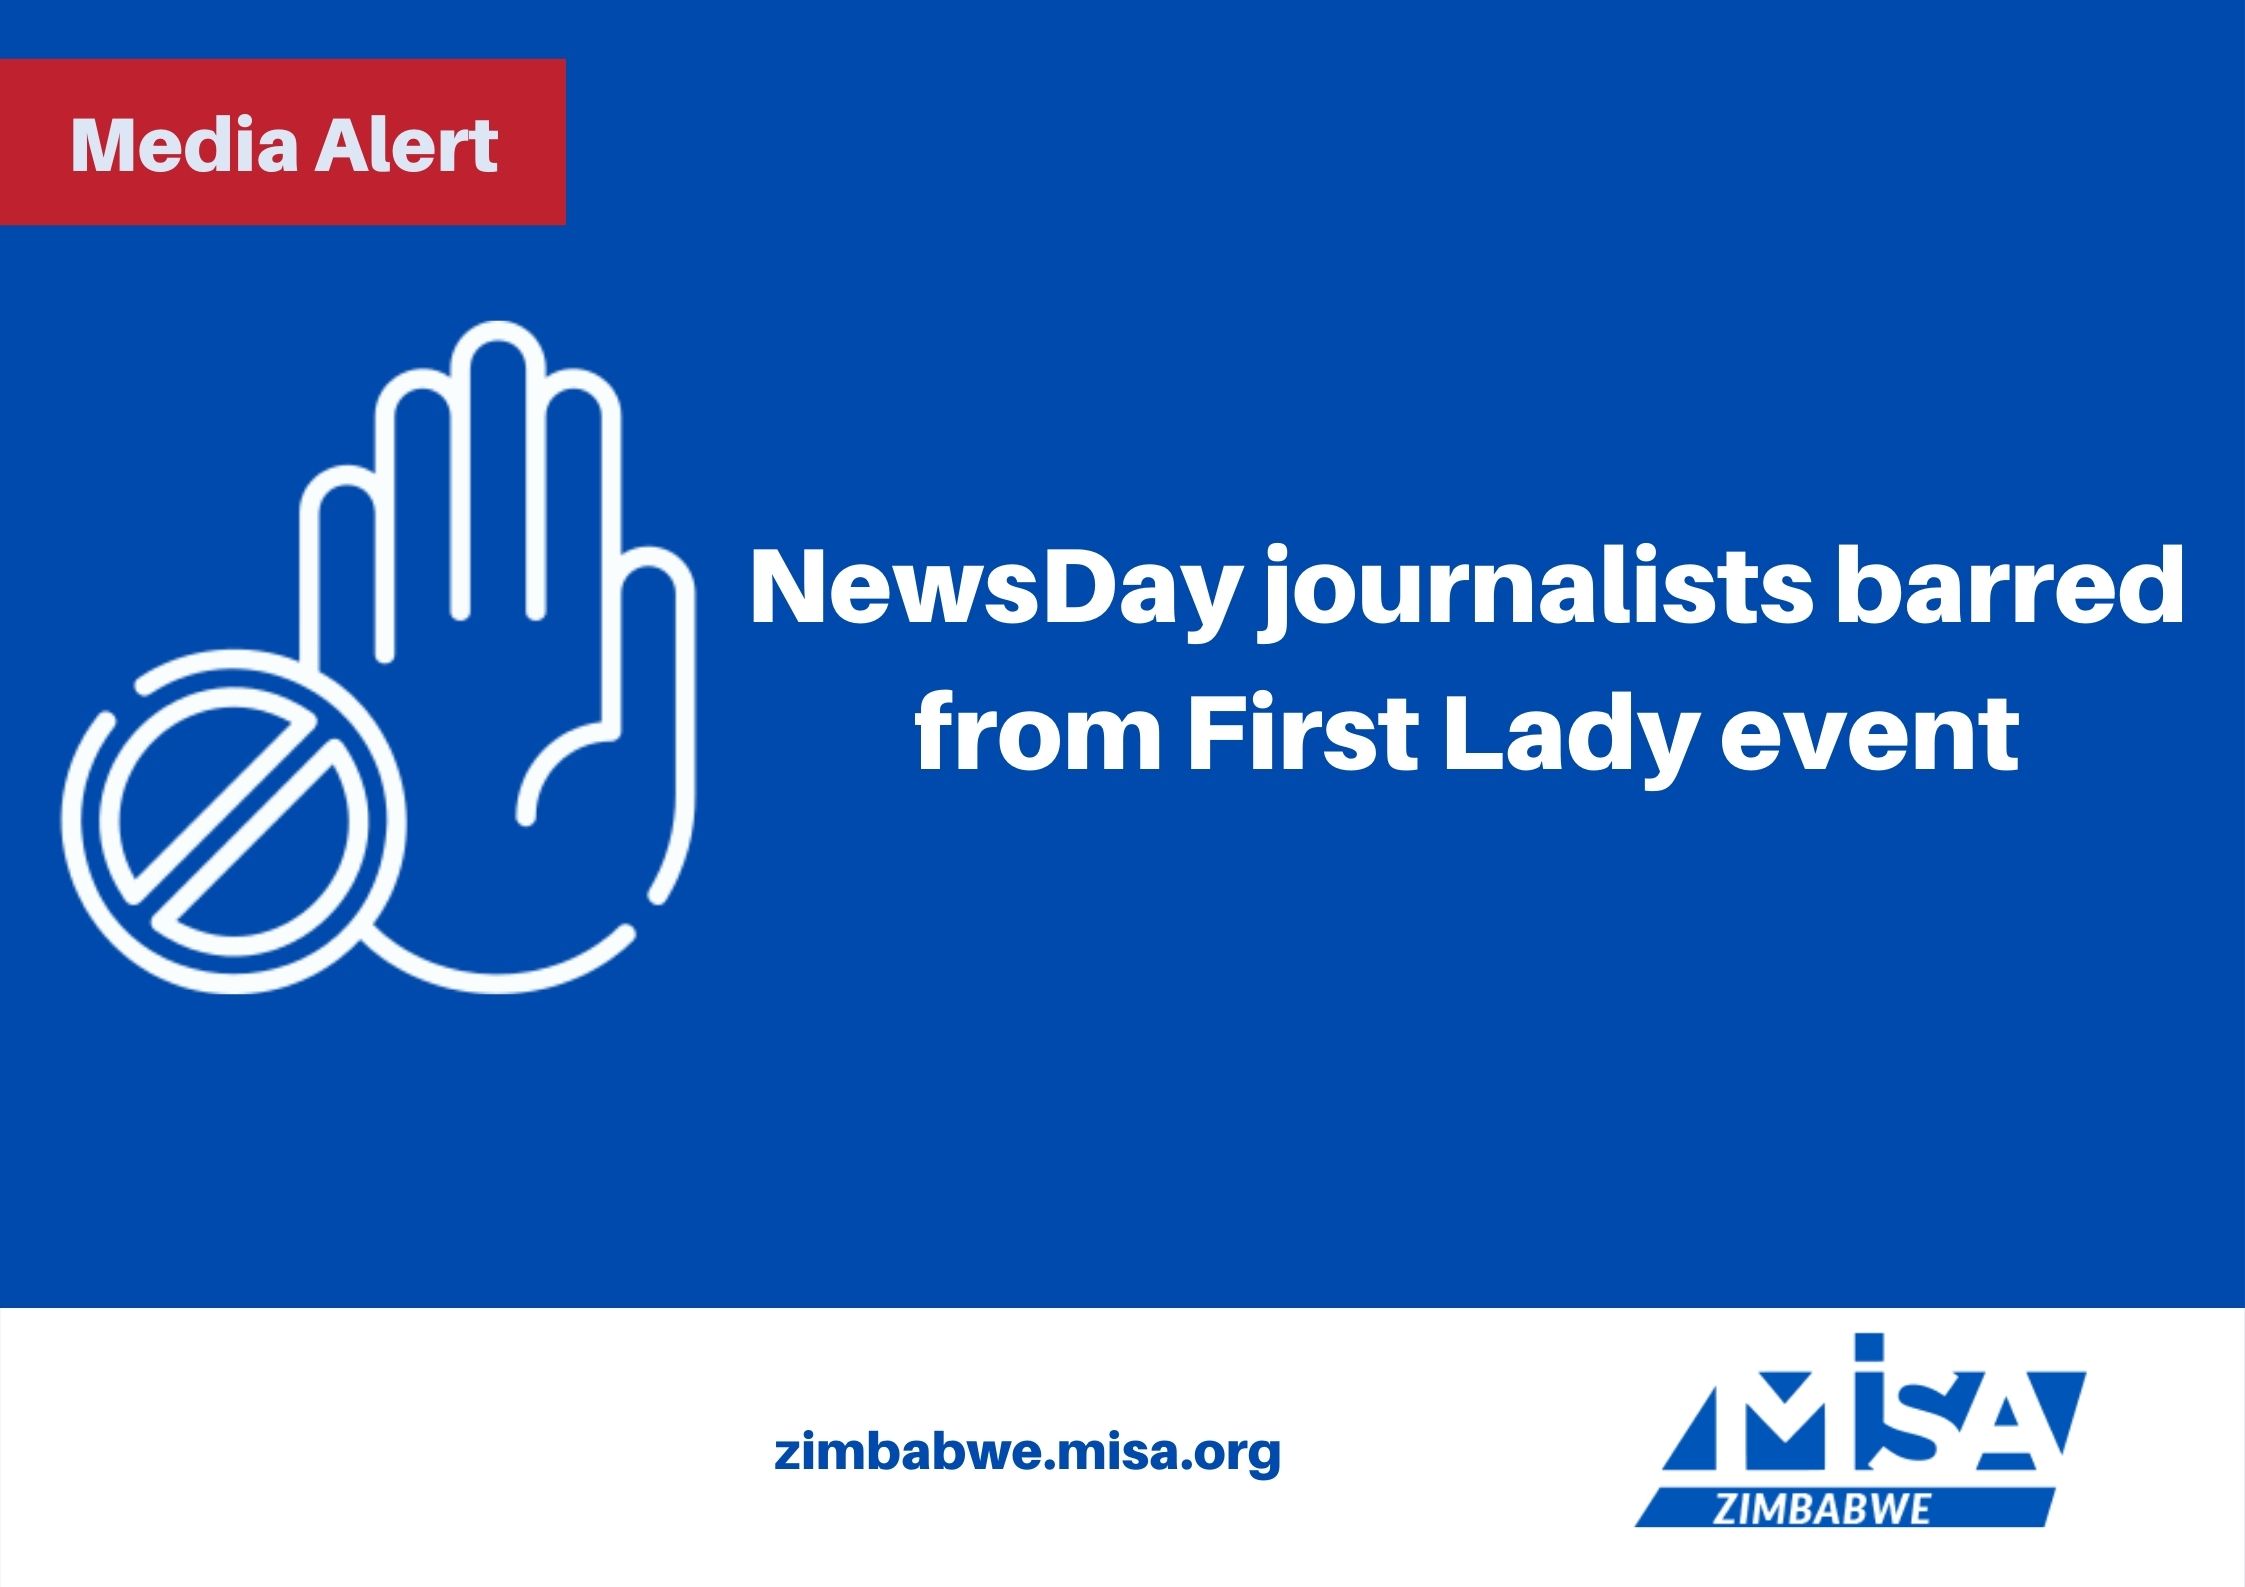 NewsDay journalists barred from First Lady event